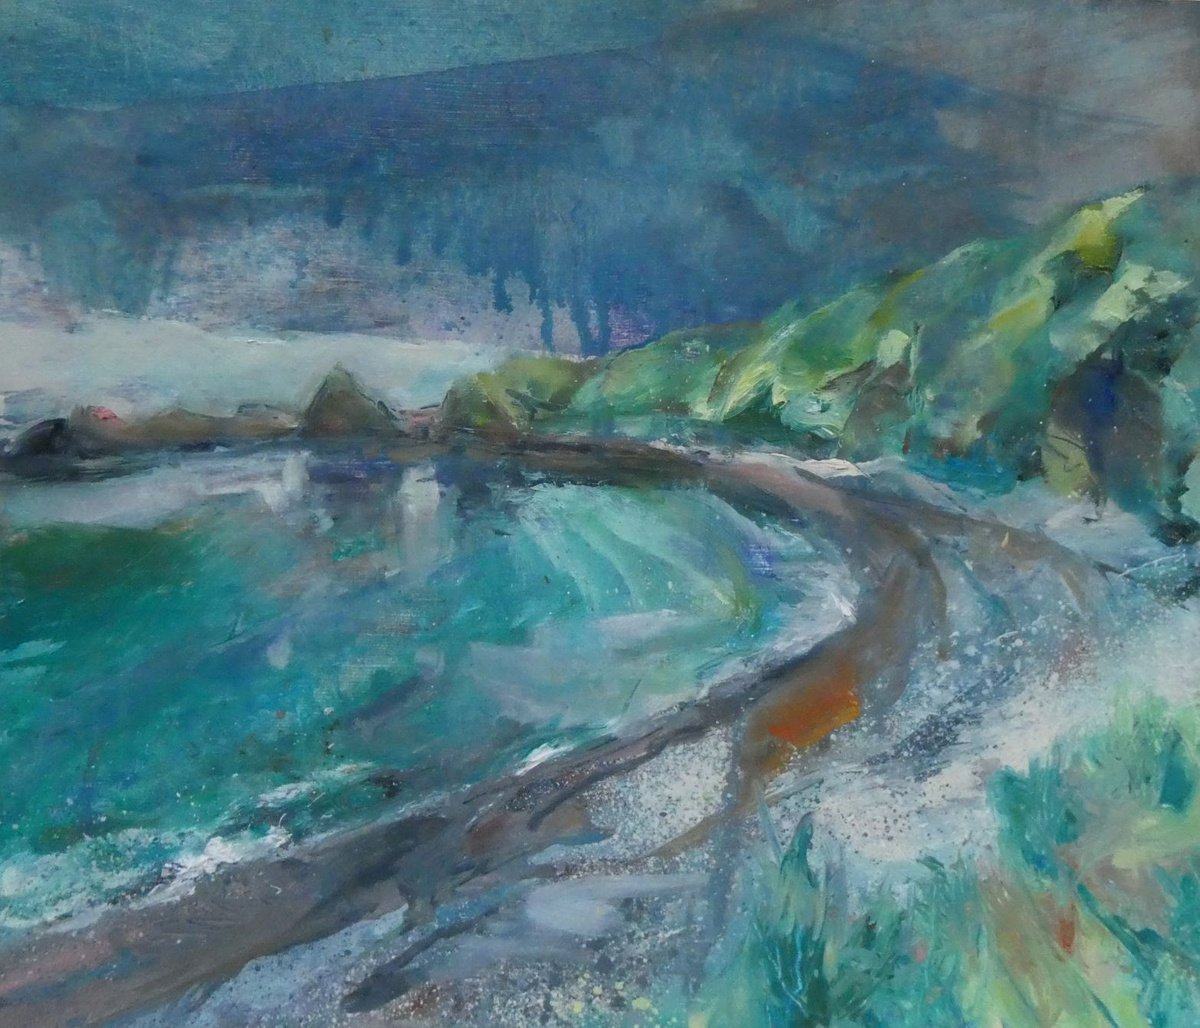 Catterline bay, afternoon by Claire Williamson